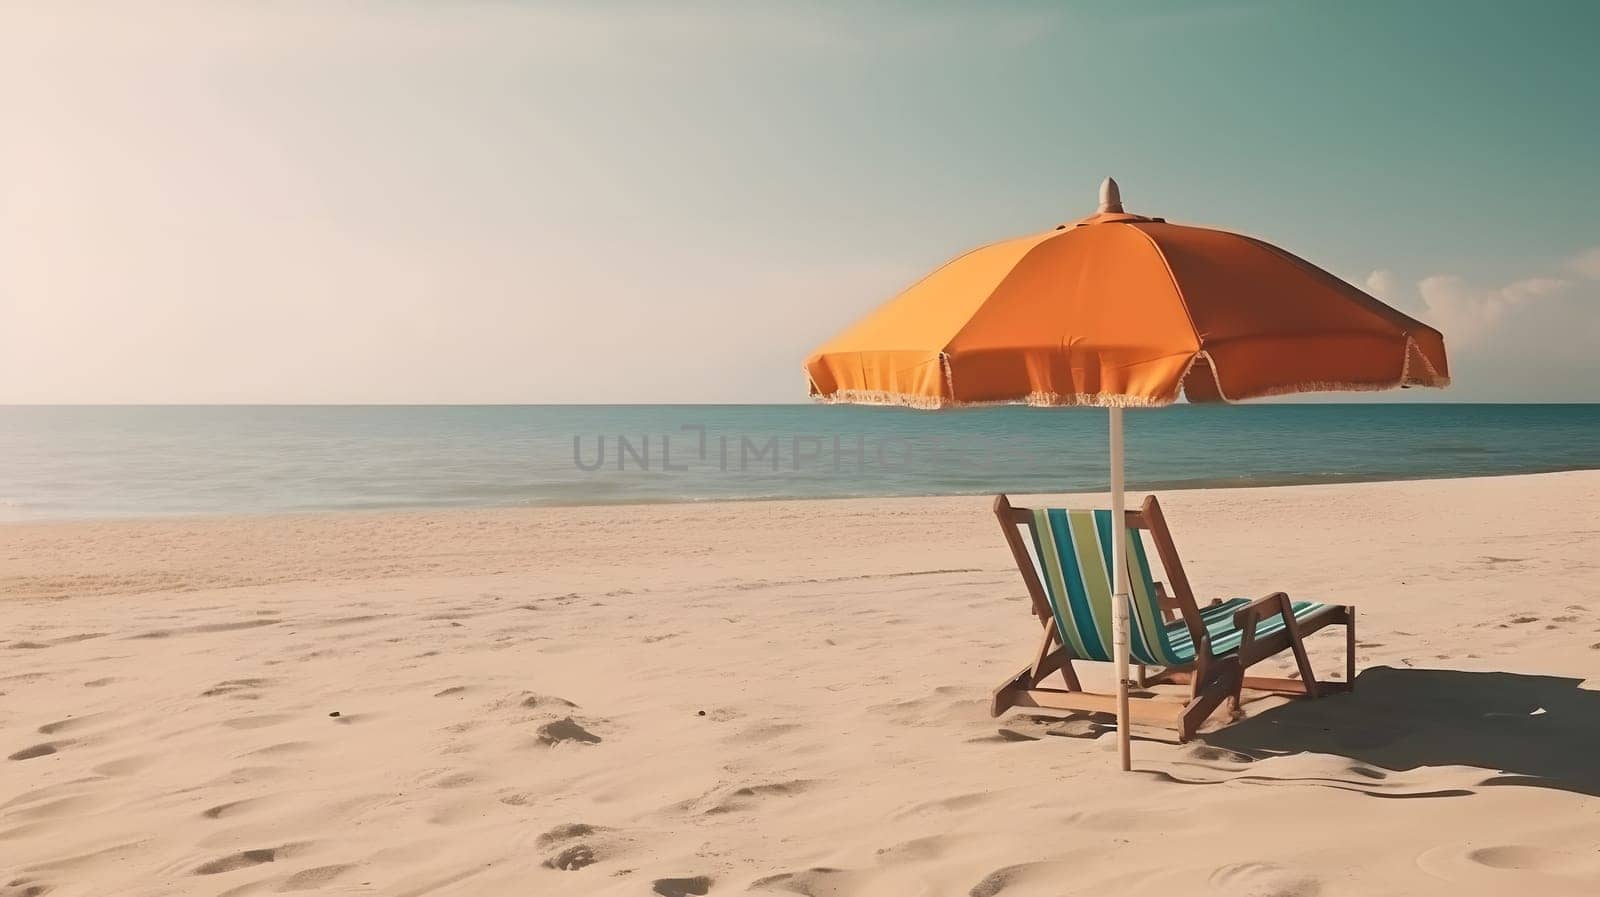 Beach umbrella with chair on the sand beach. Neural network generated in May 2023. Not based on any actual person, scene or pattern.